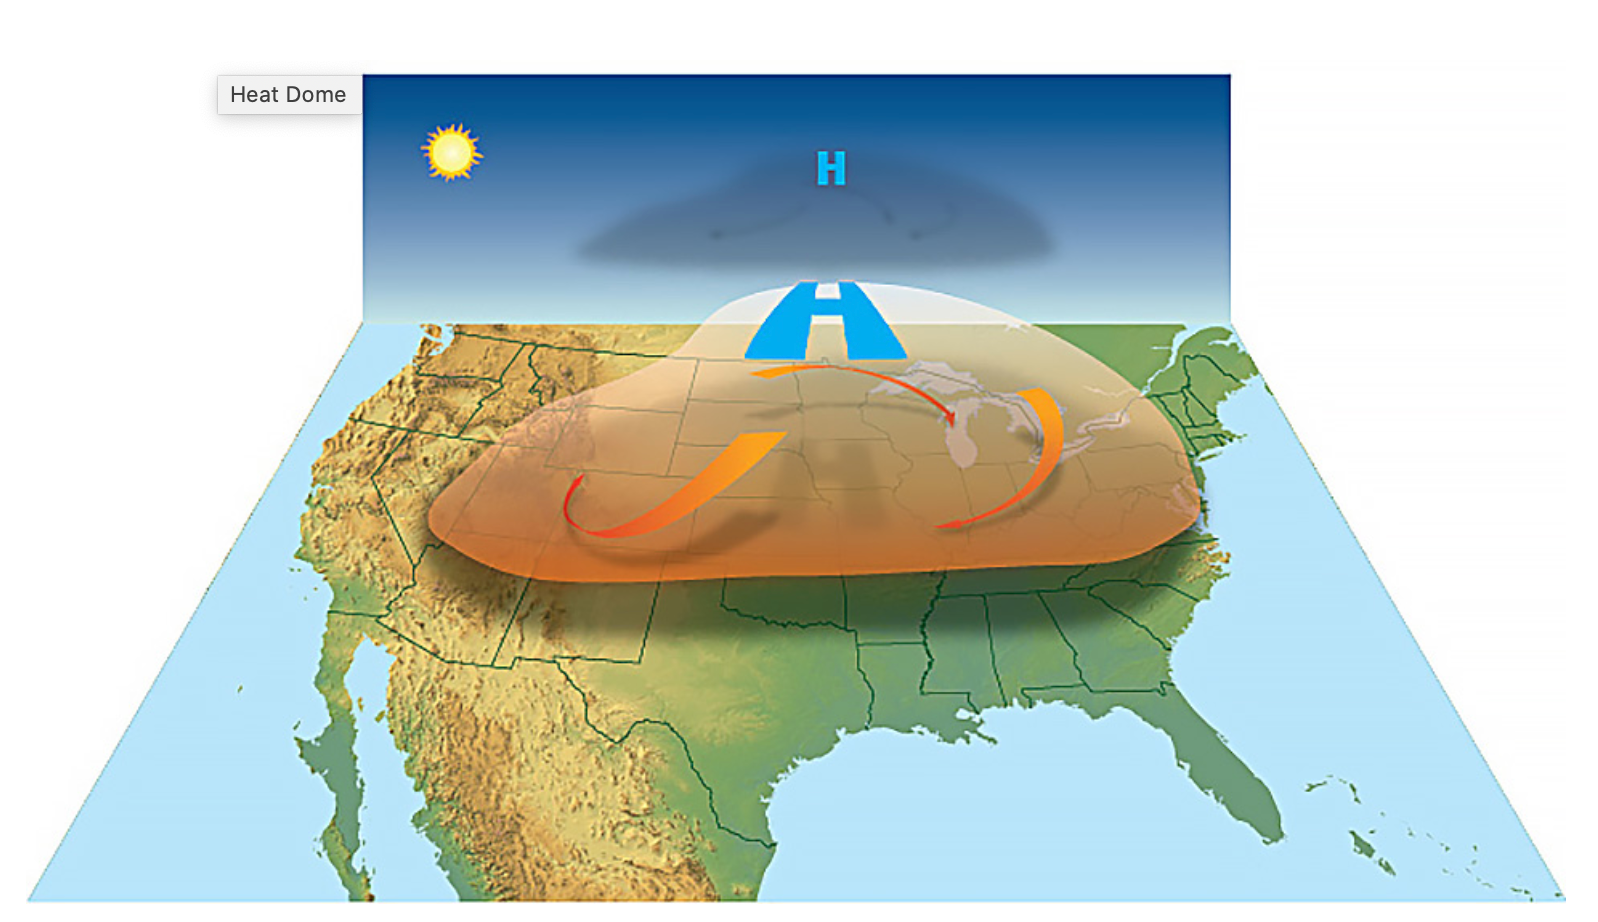 High-pressure circulation in the atmosphere acts like a dome or cap, trapping heat at the surface and favoring the formation of a heat wave